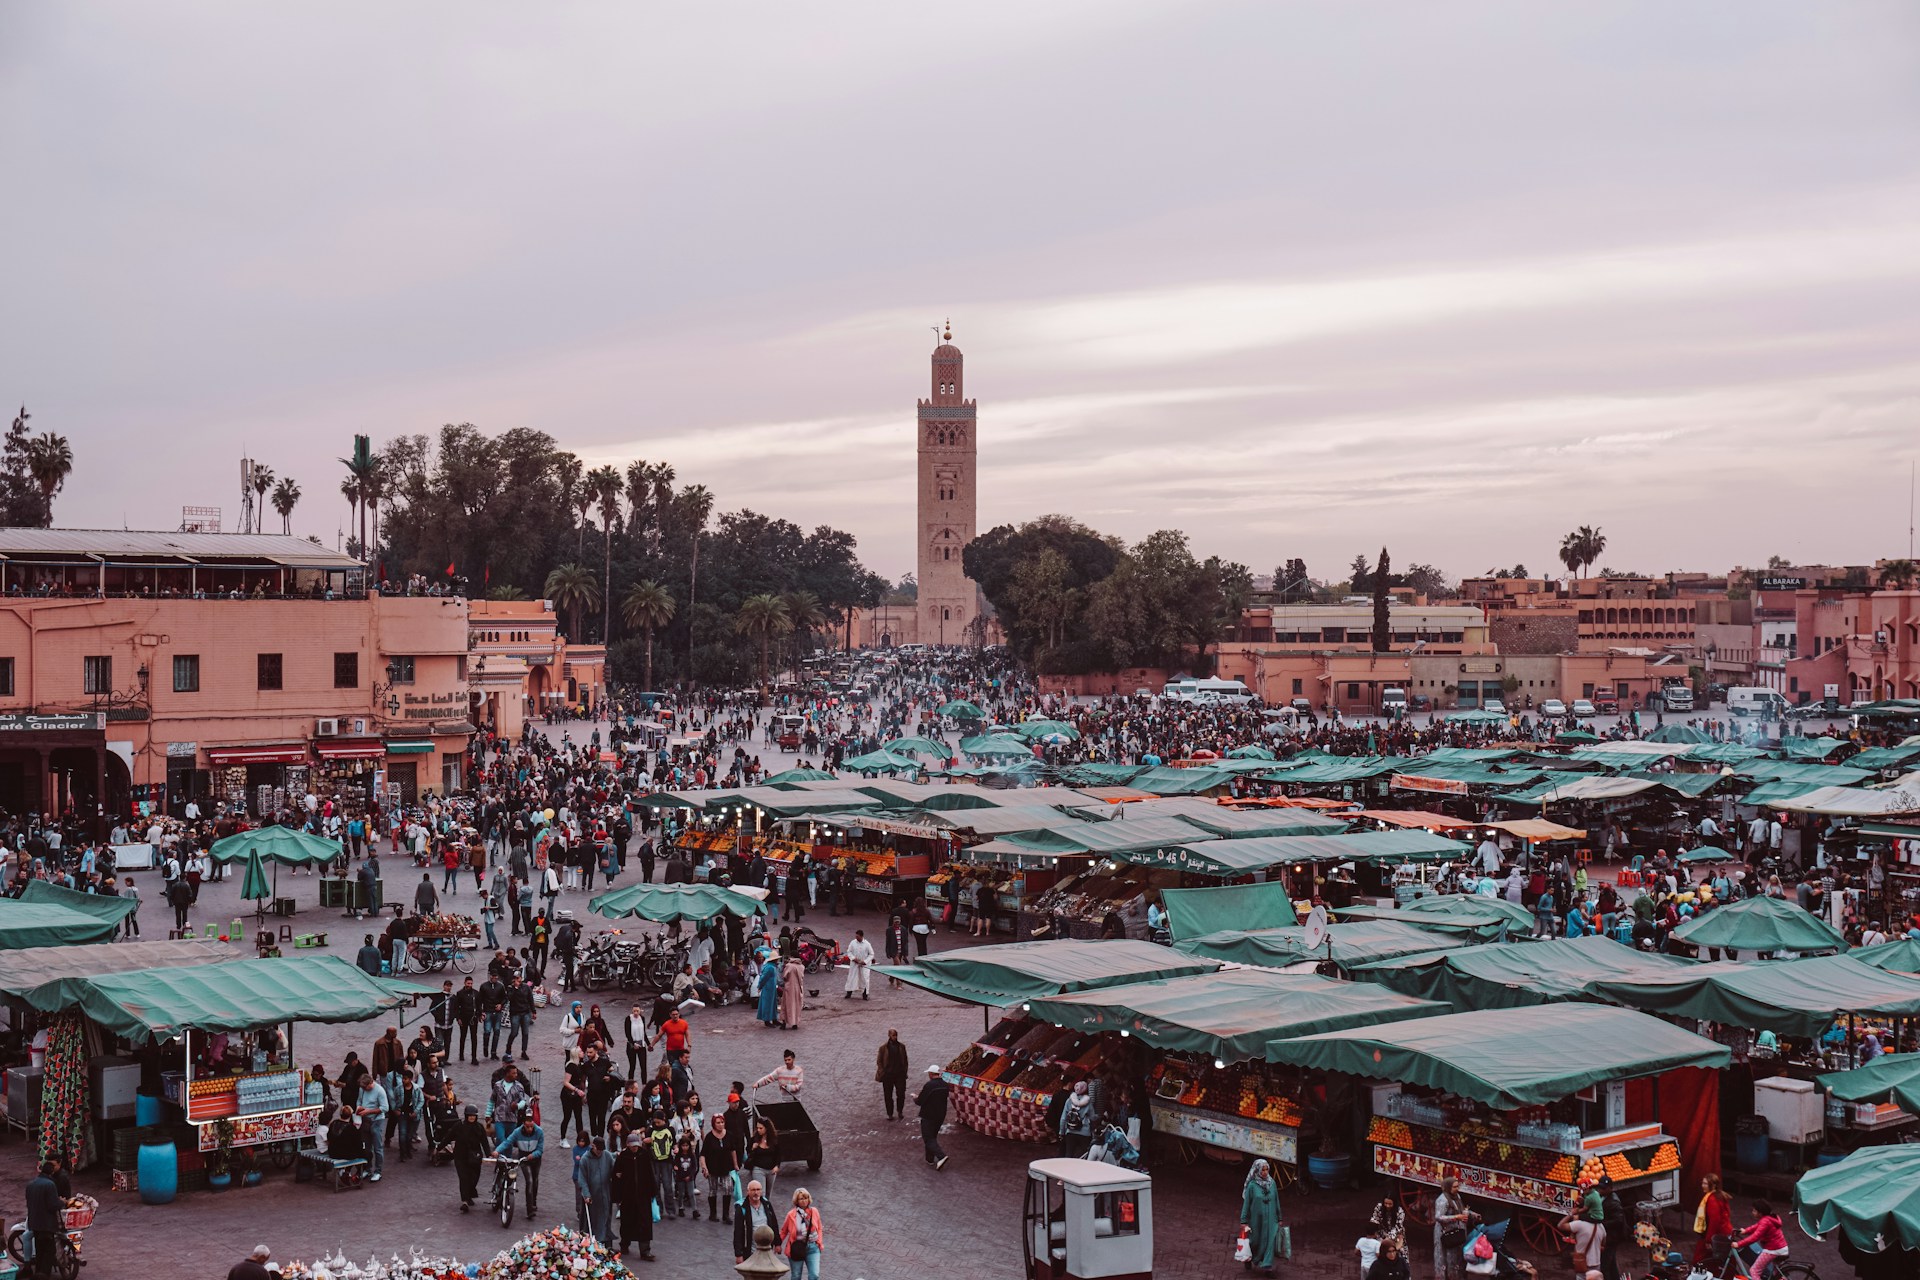 A Holiday in Marrakesh